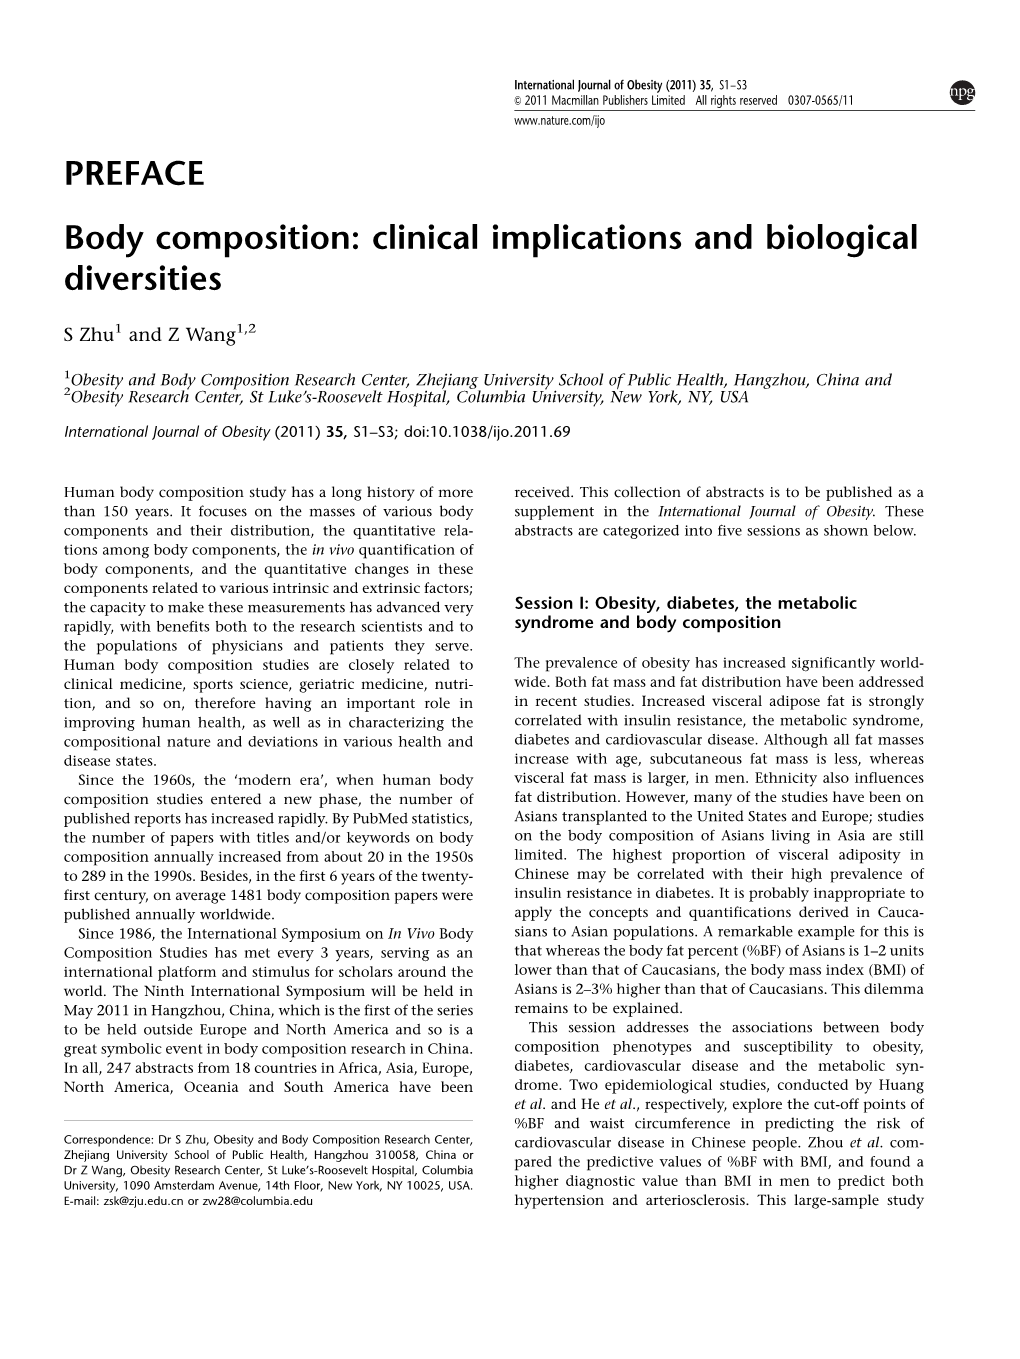 Body Composition: Clinical Implications and Biological Diversities